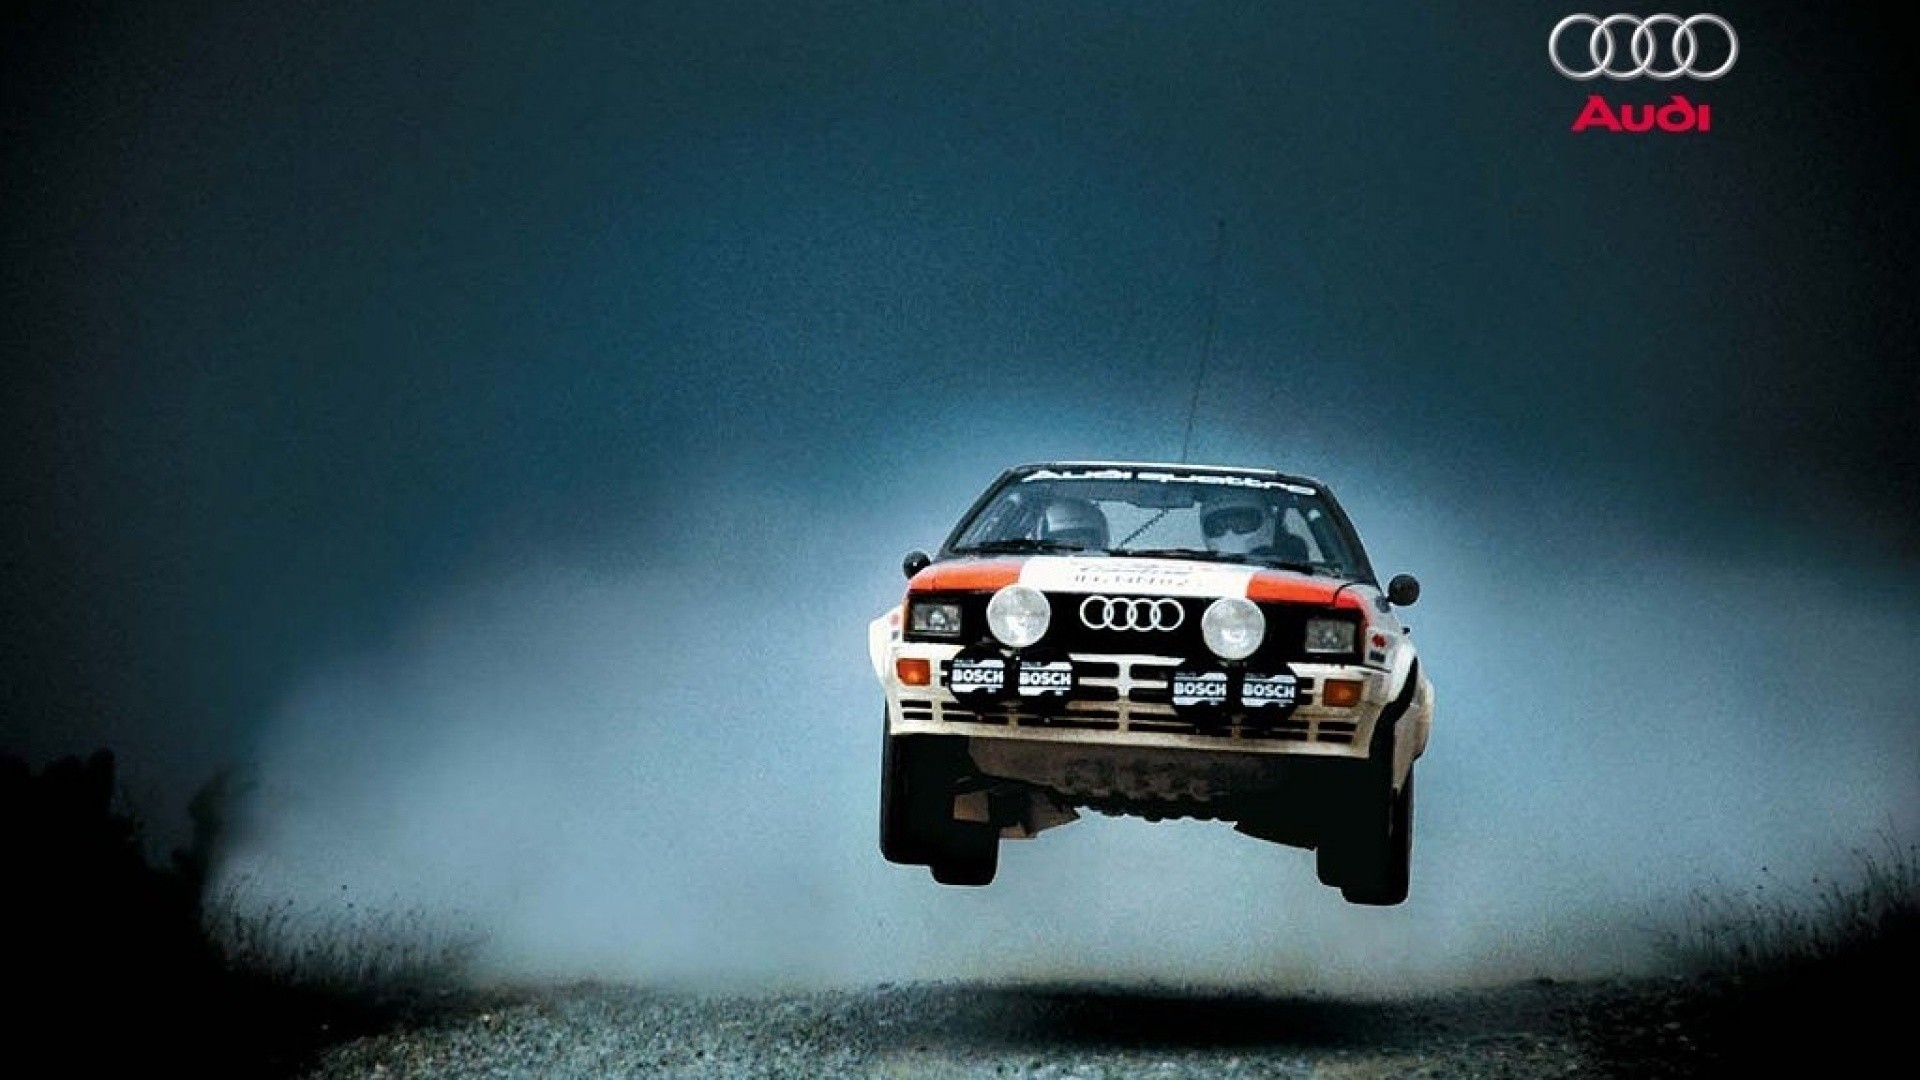 1920x1080  Audi Quattro Rally. How to set wallpaper on your desktop? Click  the download link from above and set the wallpaper on the desktop from your  OS.